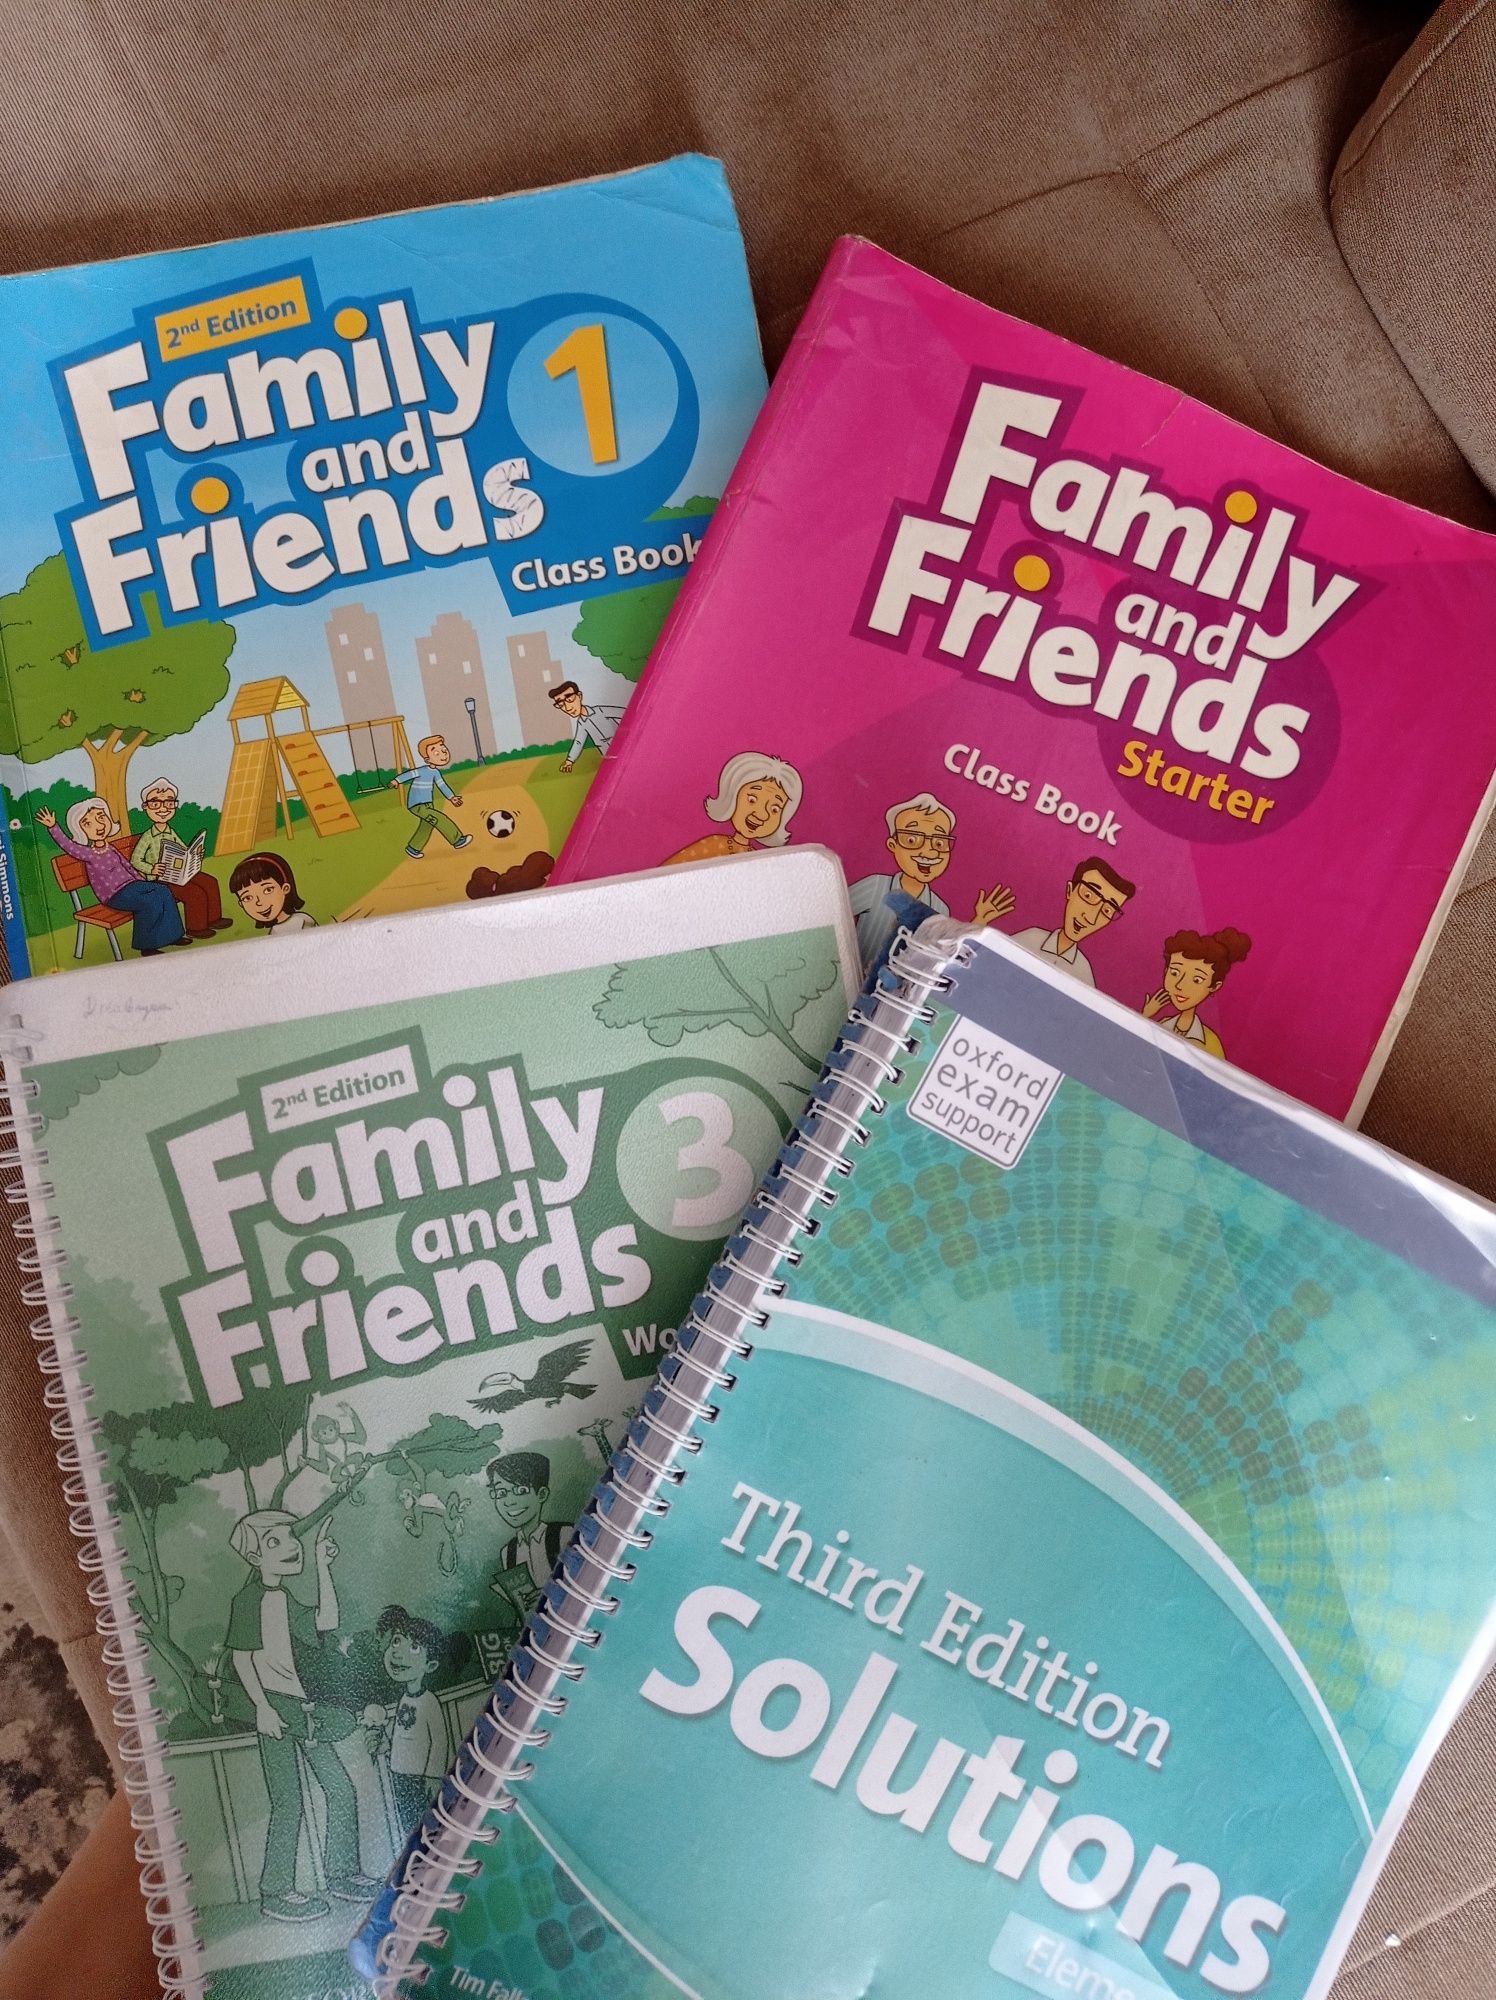 Family and friends 1, 3, third edition solutions